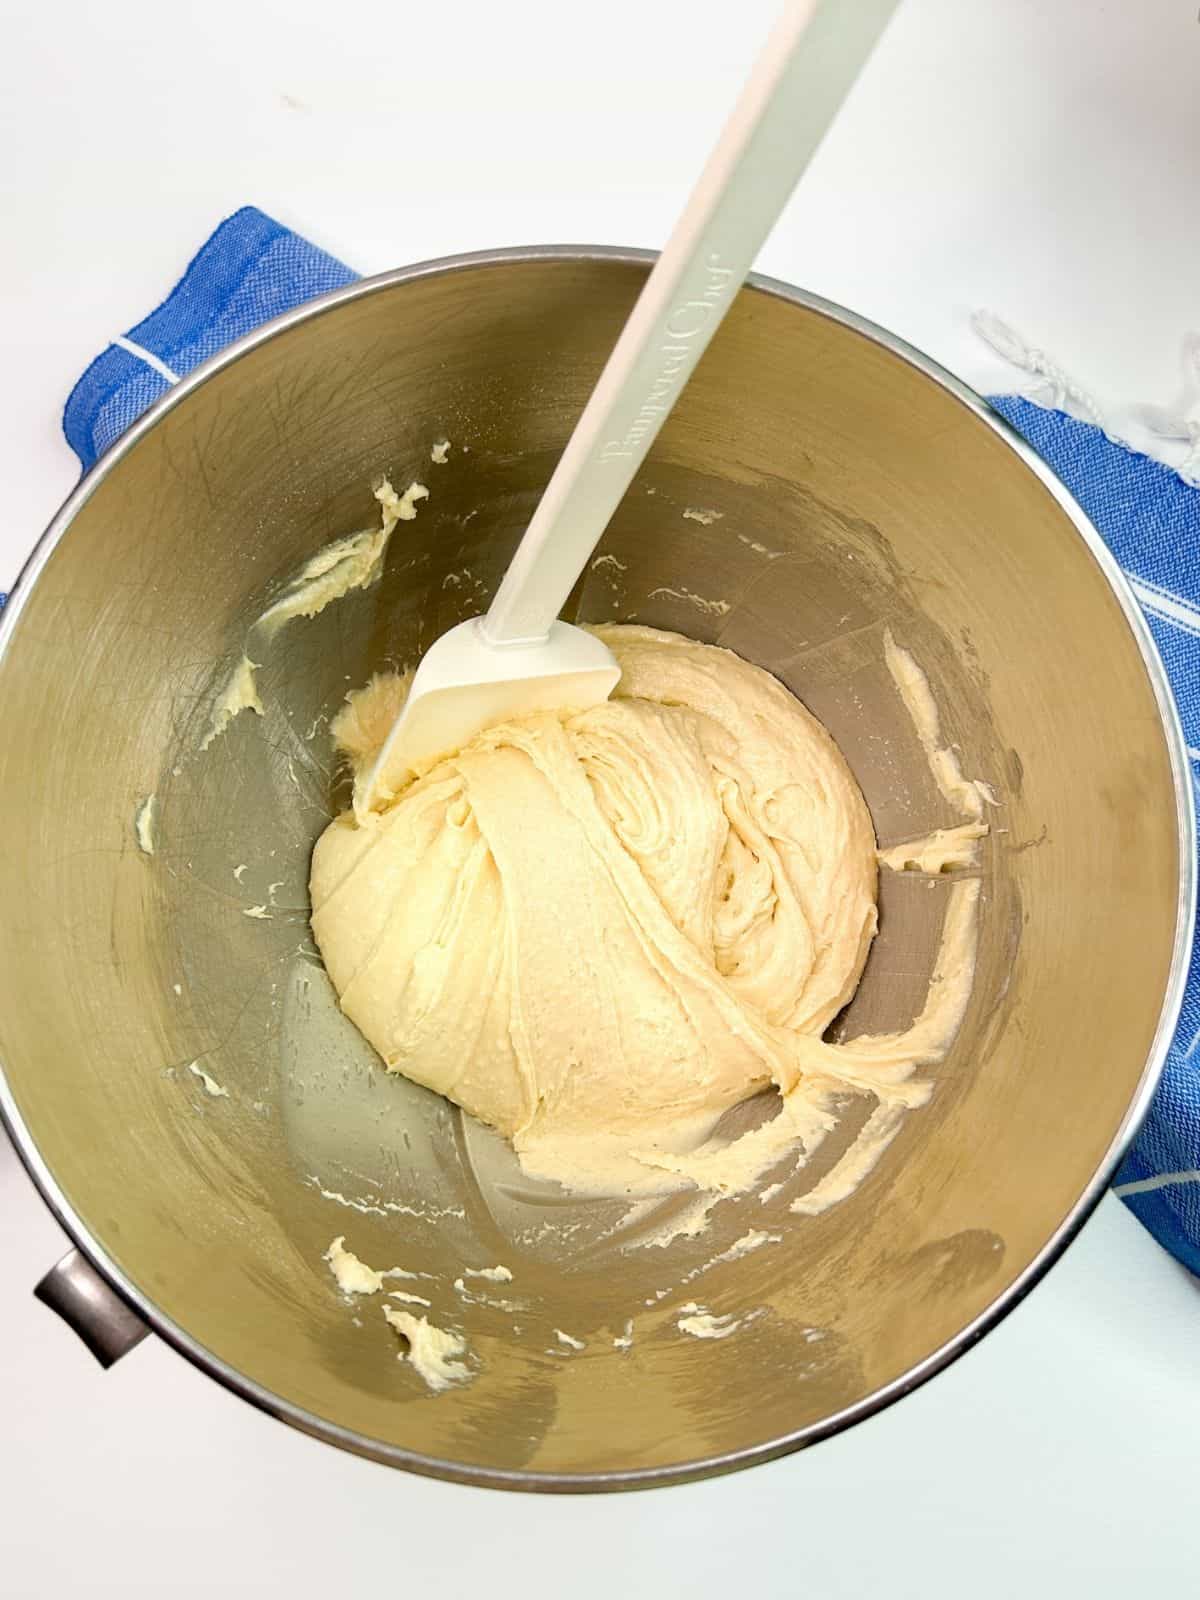 Cake mix batter in a mixing bowl